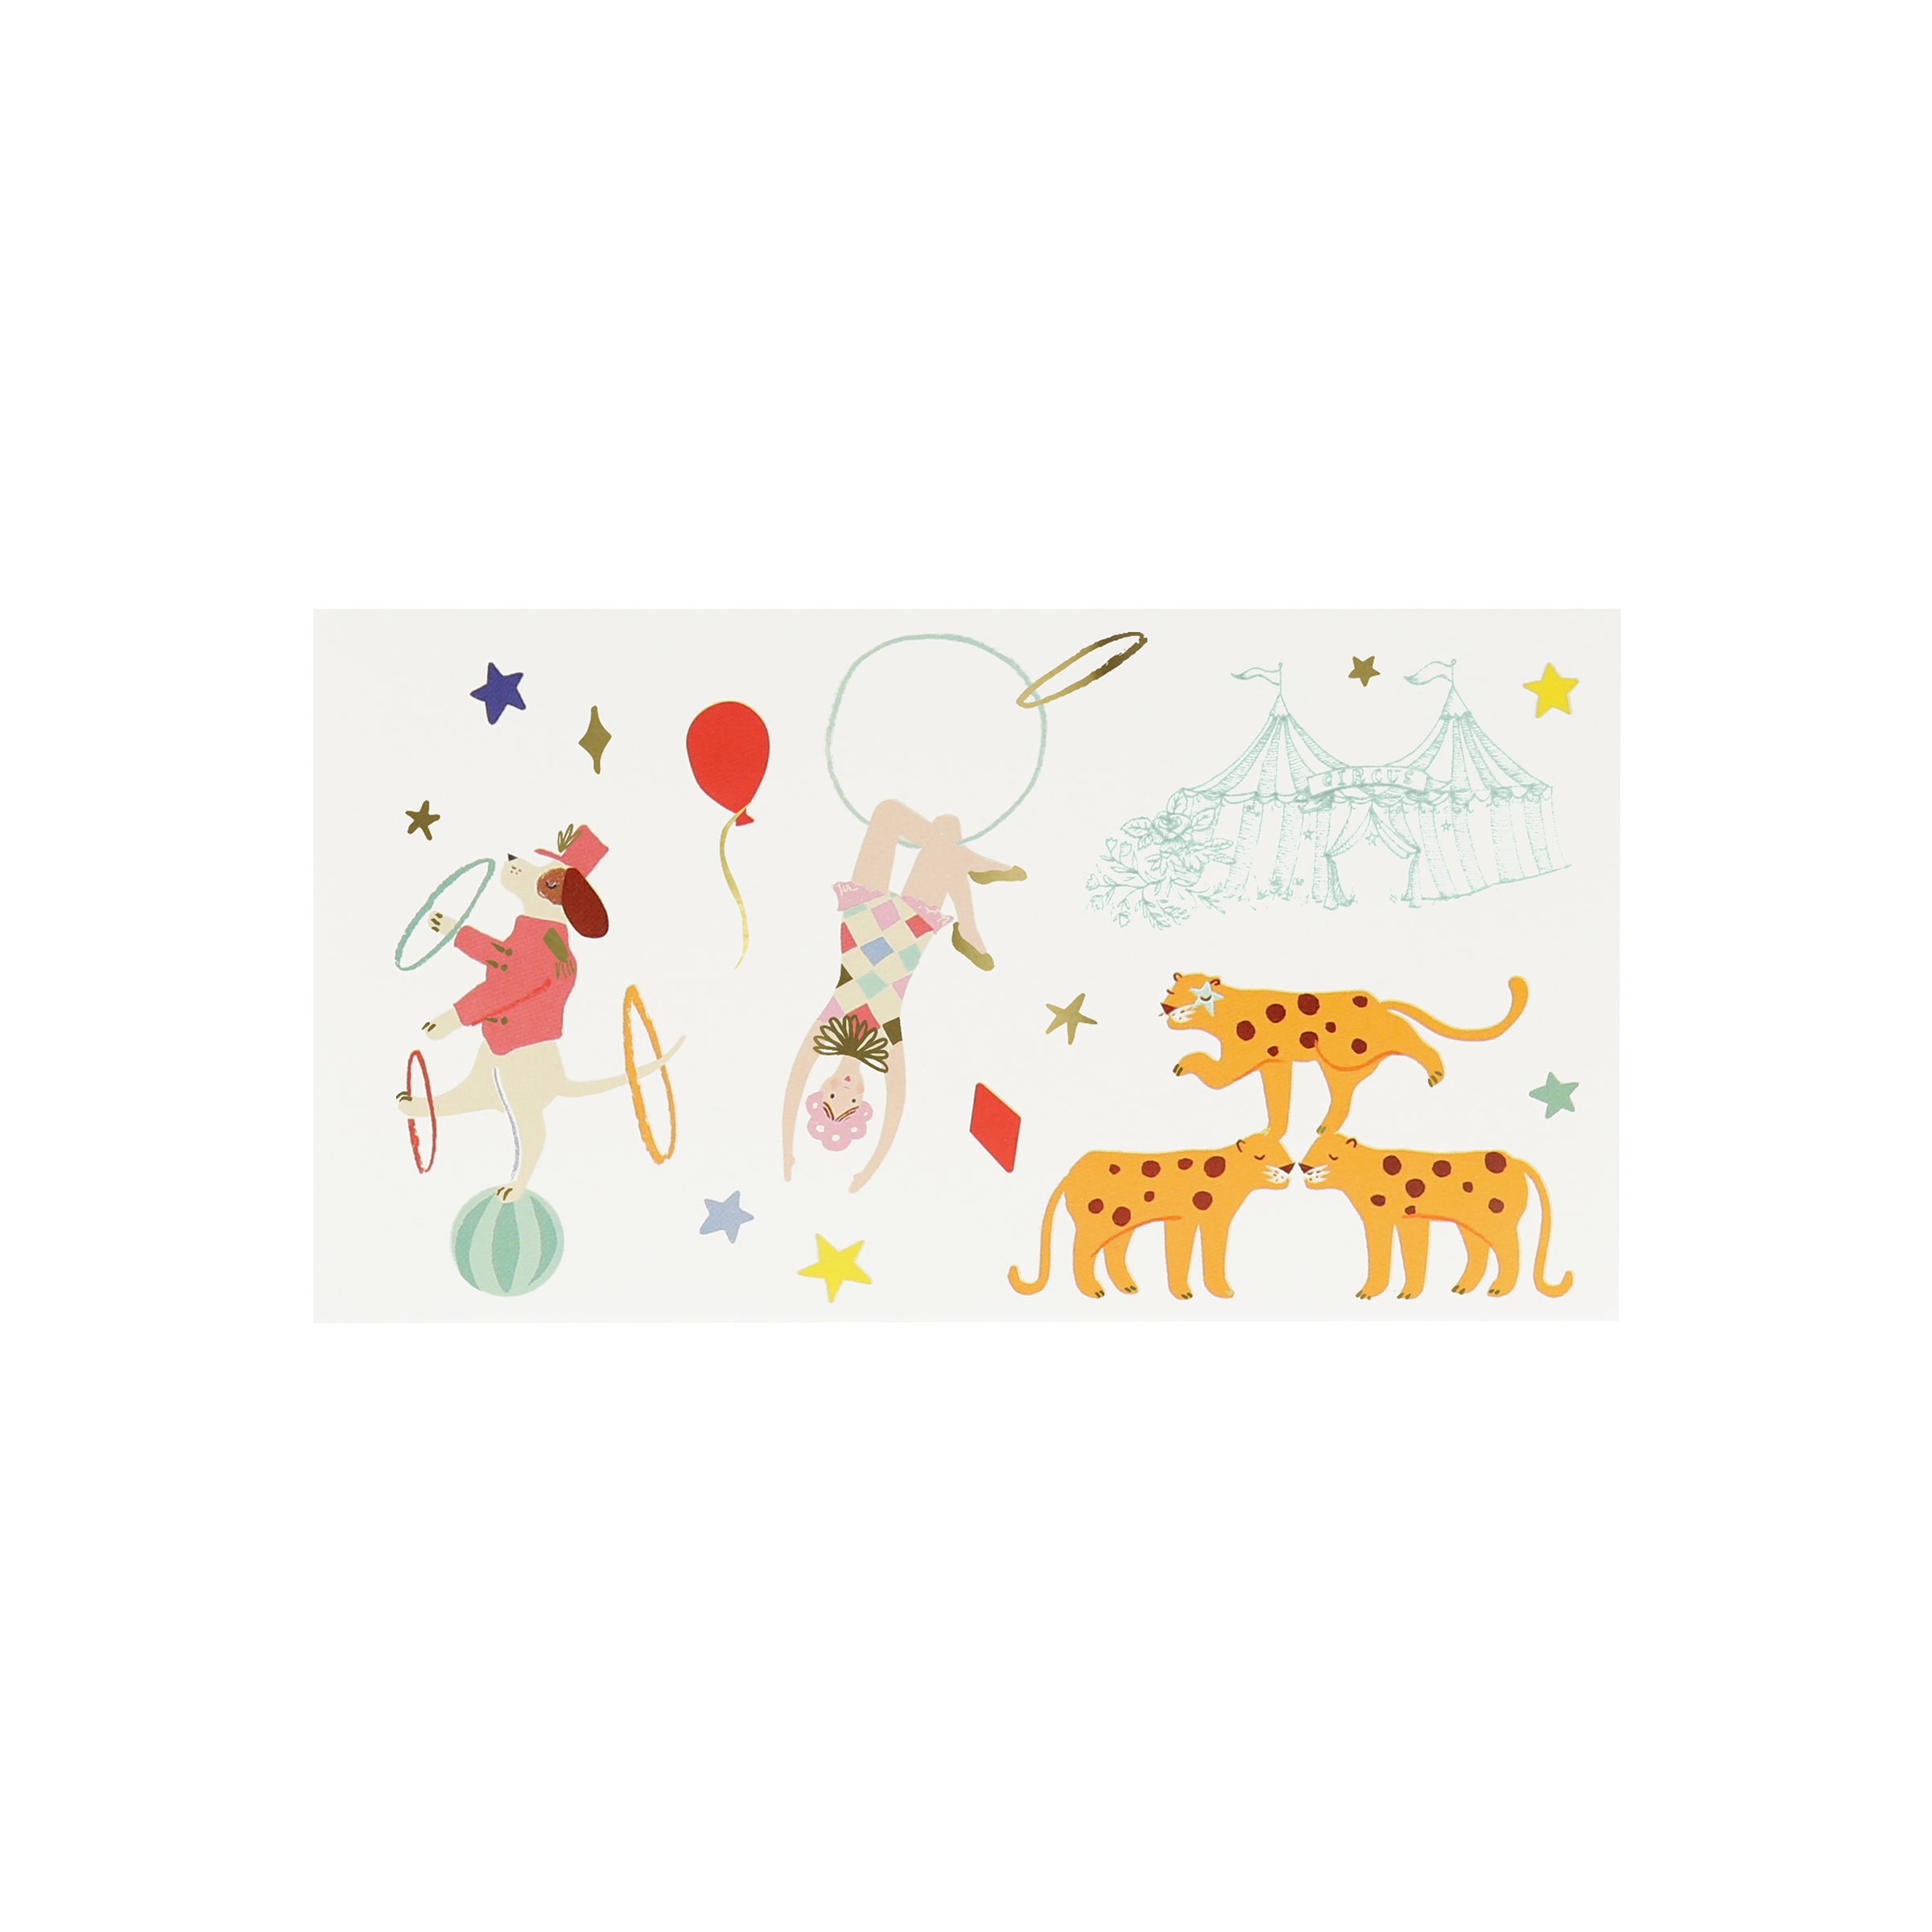 Our kids temporary tattoos with circus characters are perfect for a circus party.